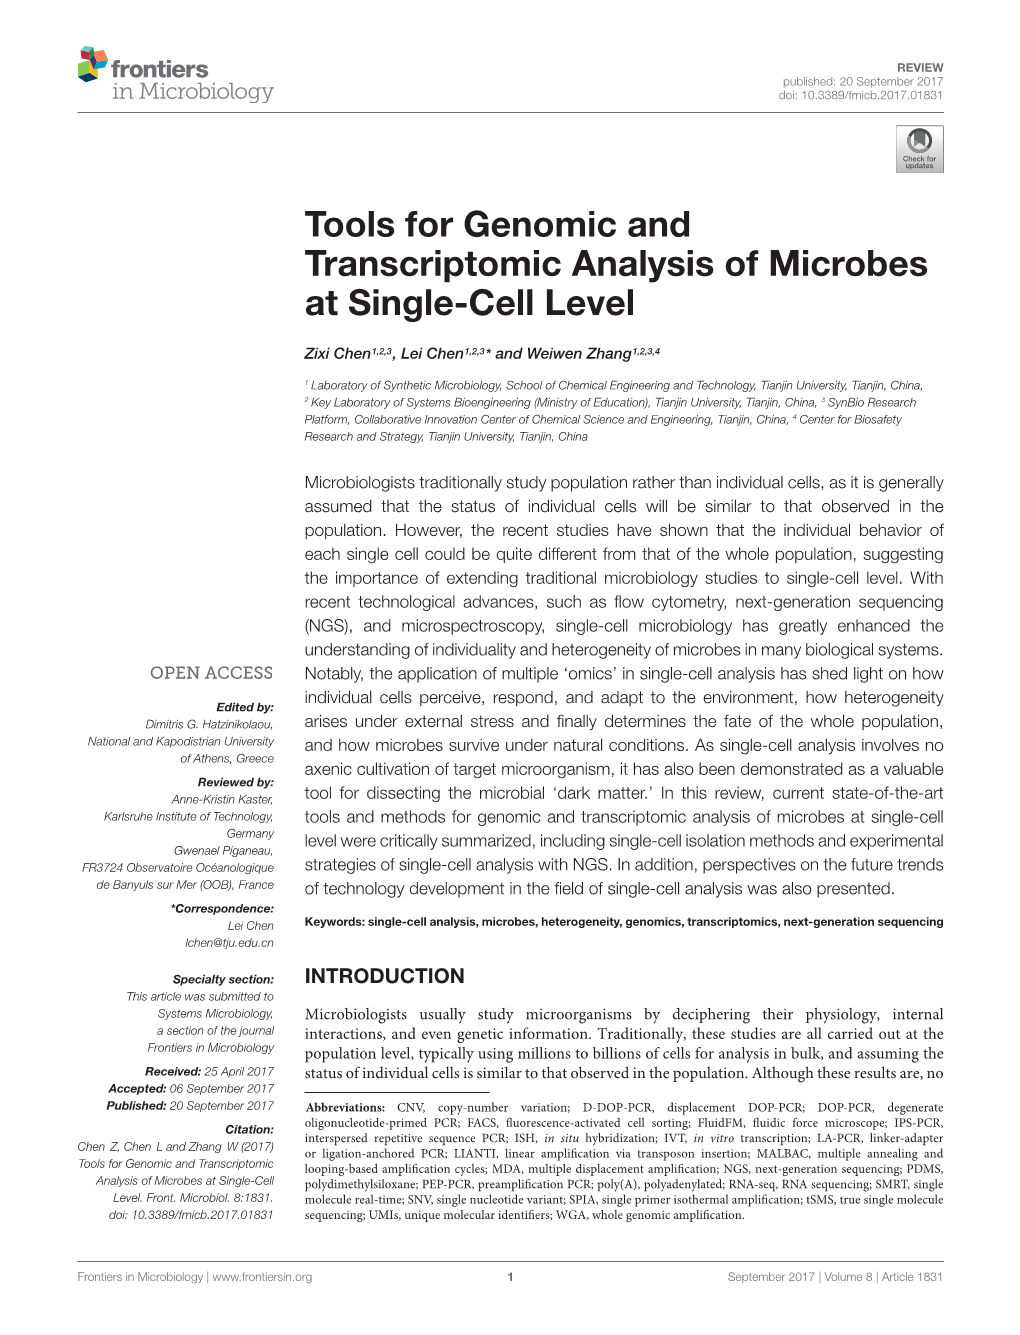 Tools for Genomic and Transcriptomic Analysis of Microbes at Single-Cell Level